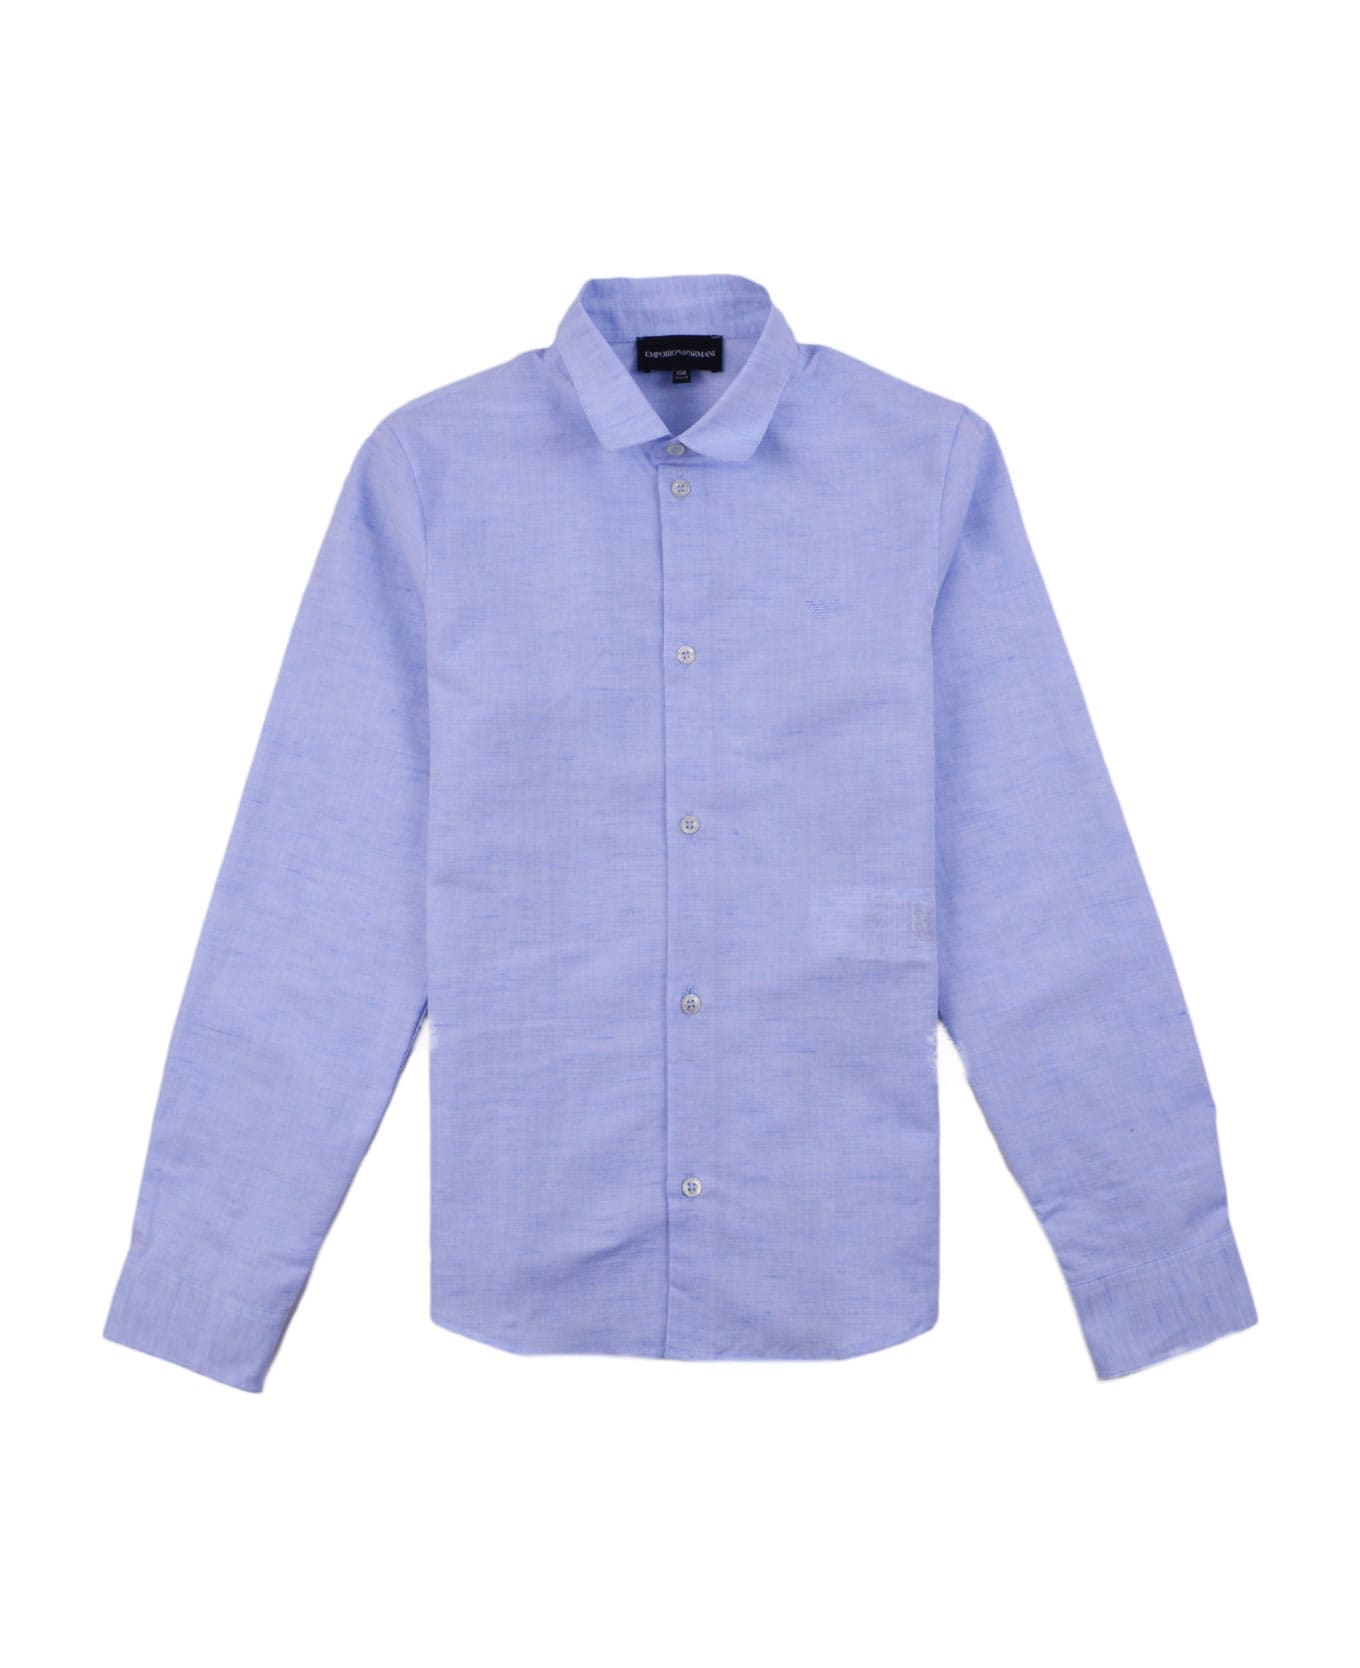 Emporio Armani Shirt In Cotton And Linen Blend - Light blue